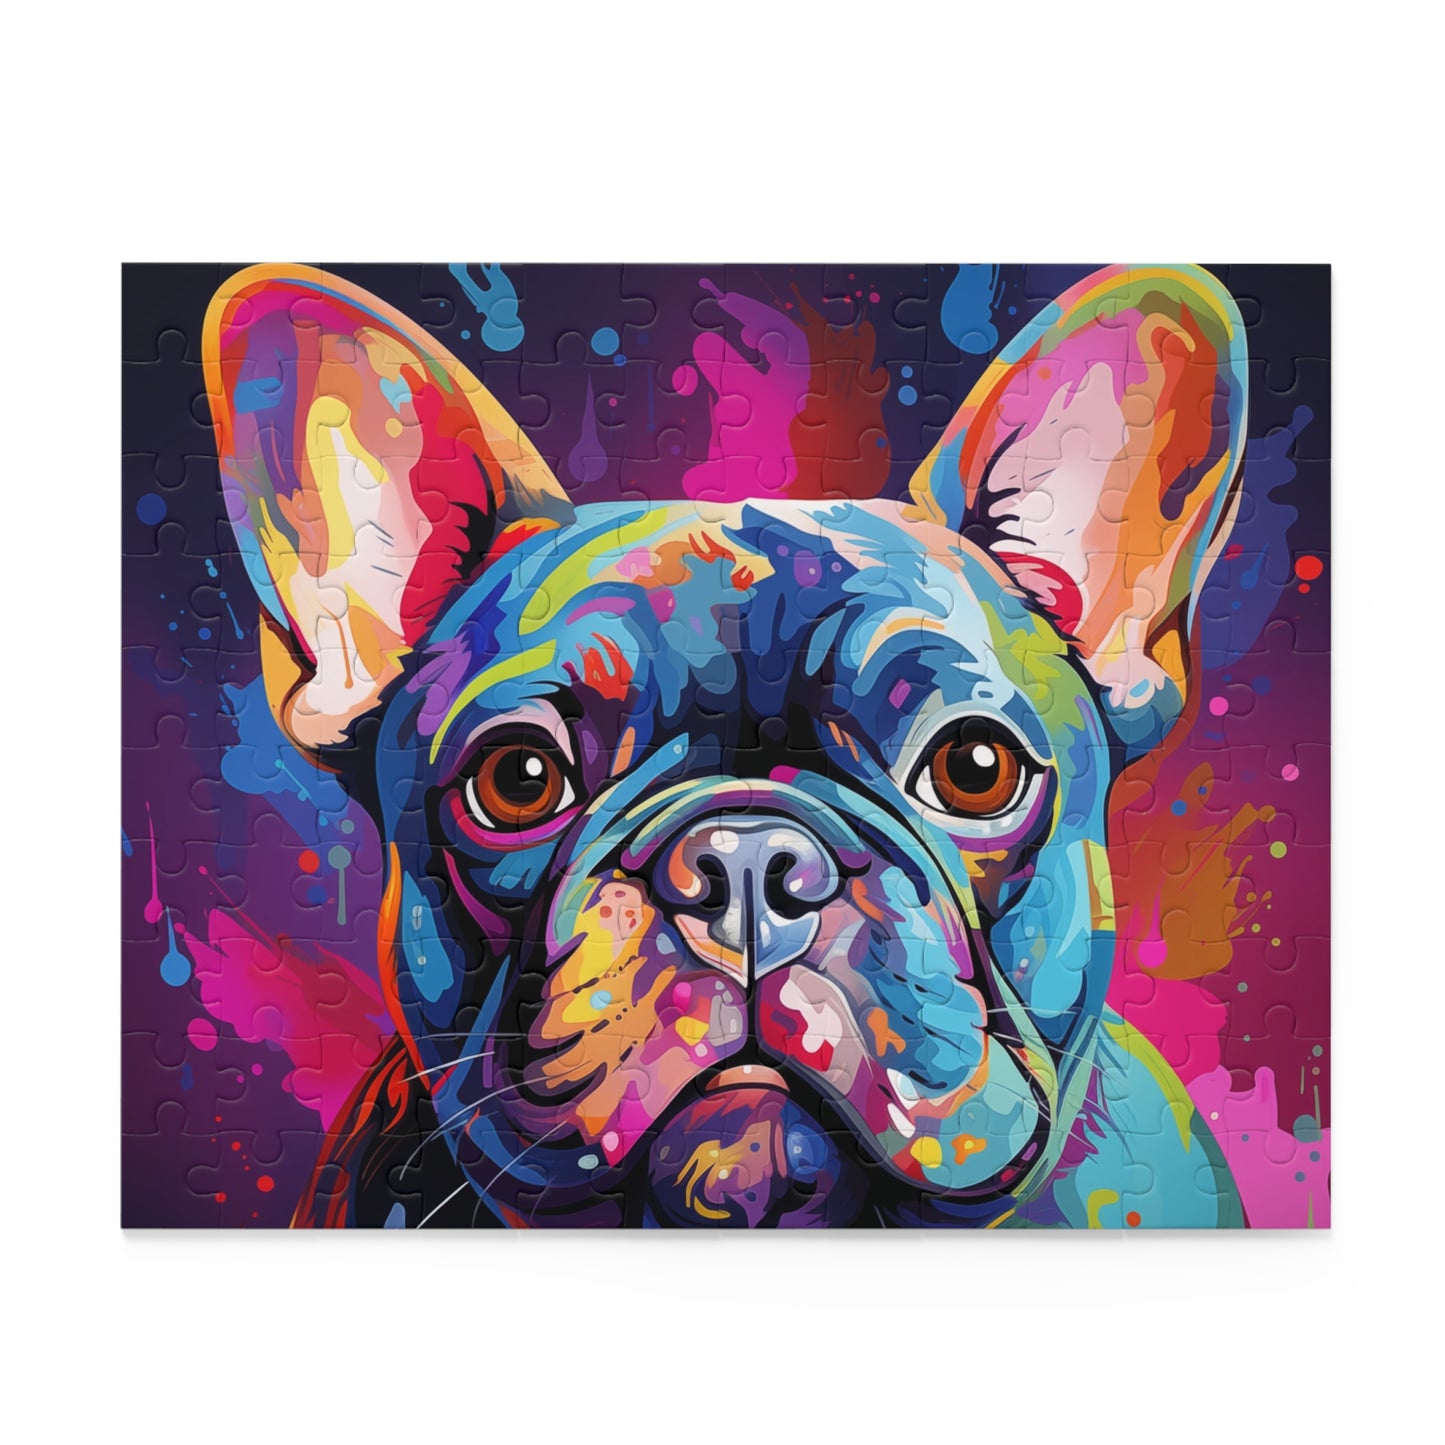 Oil Paint Watercolor Abstract Frenchie Dog Jigsaw Puzzle Adult Birthday Business Jigsaw Puzzle Gift for Him Funny Humorous Indoor Outdoor Game Gift For Her Online-2